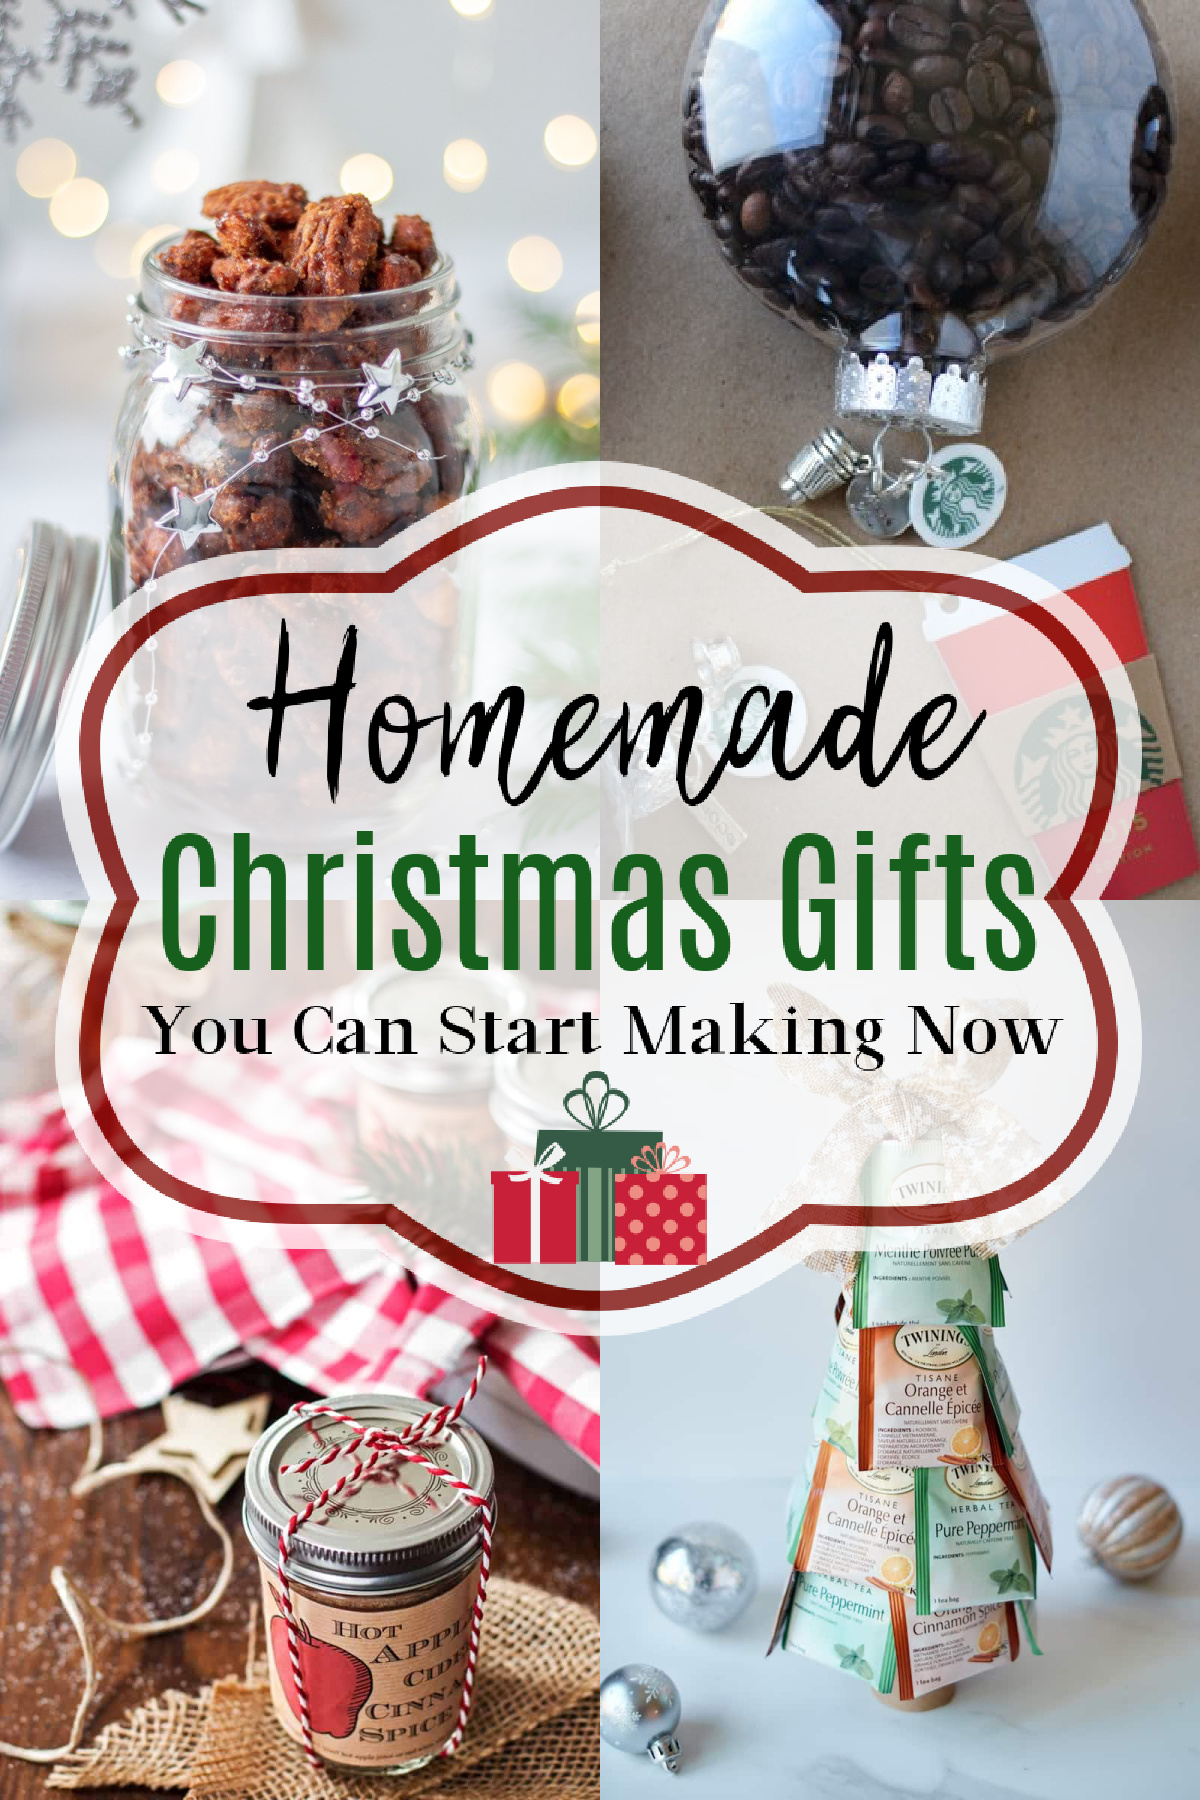 Make a Gift For Friends and Neighbors